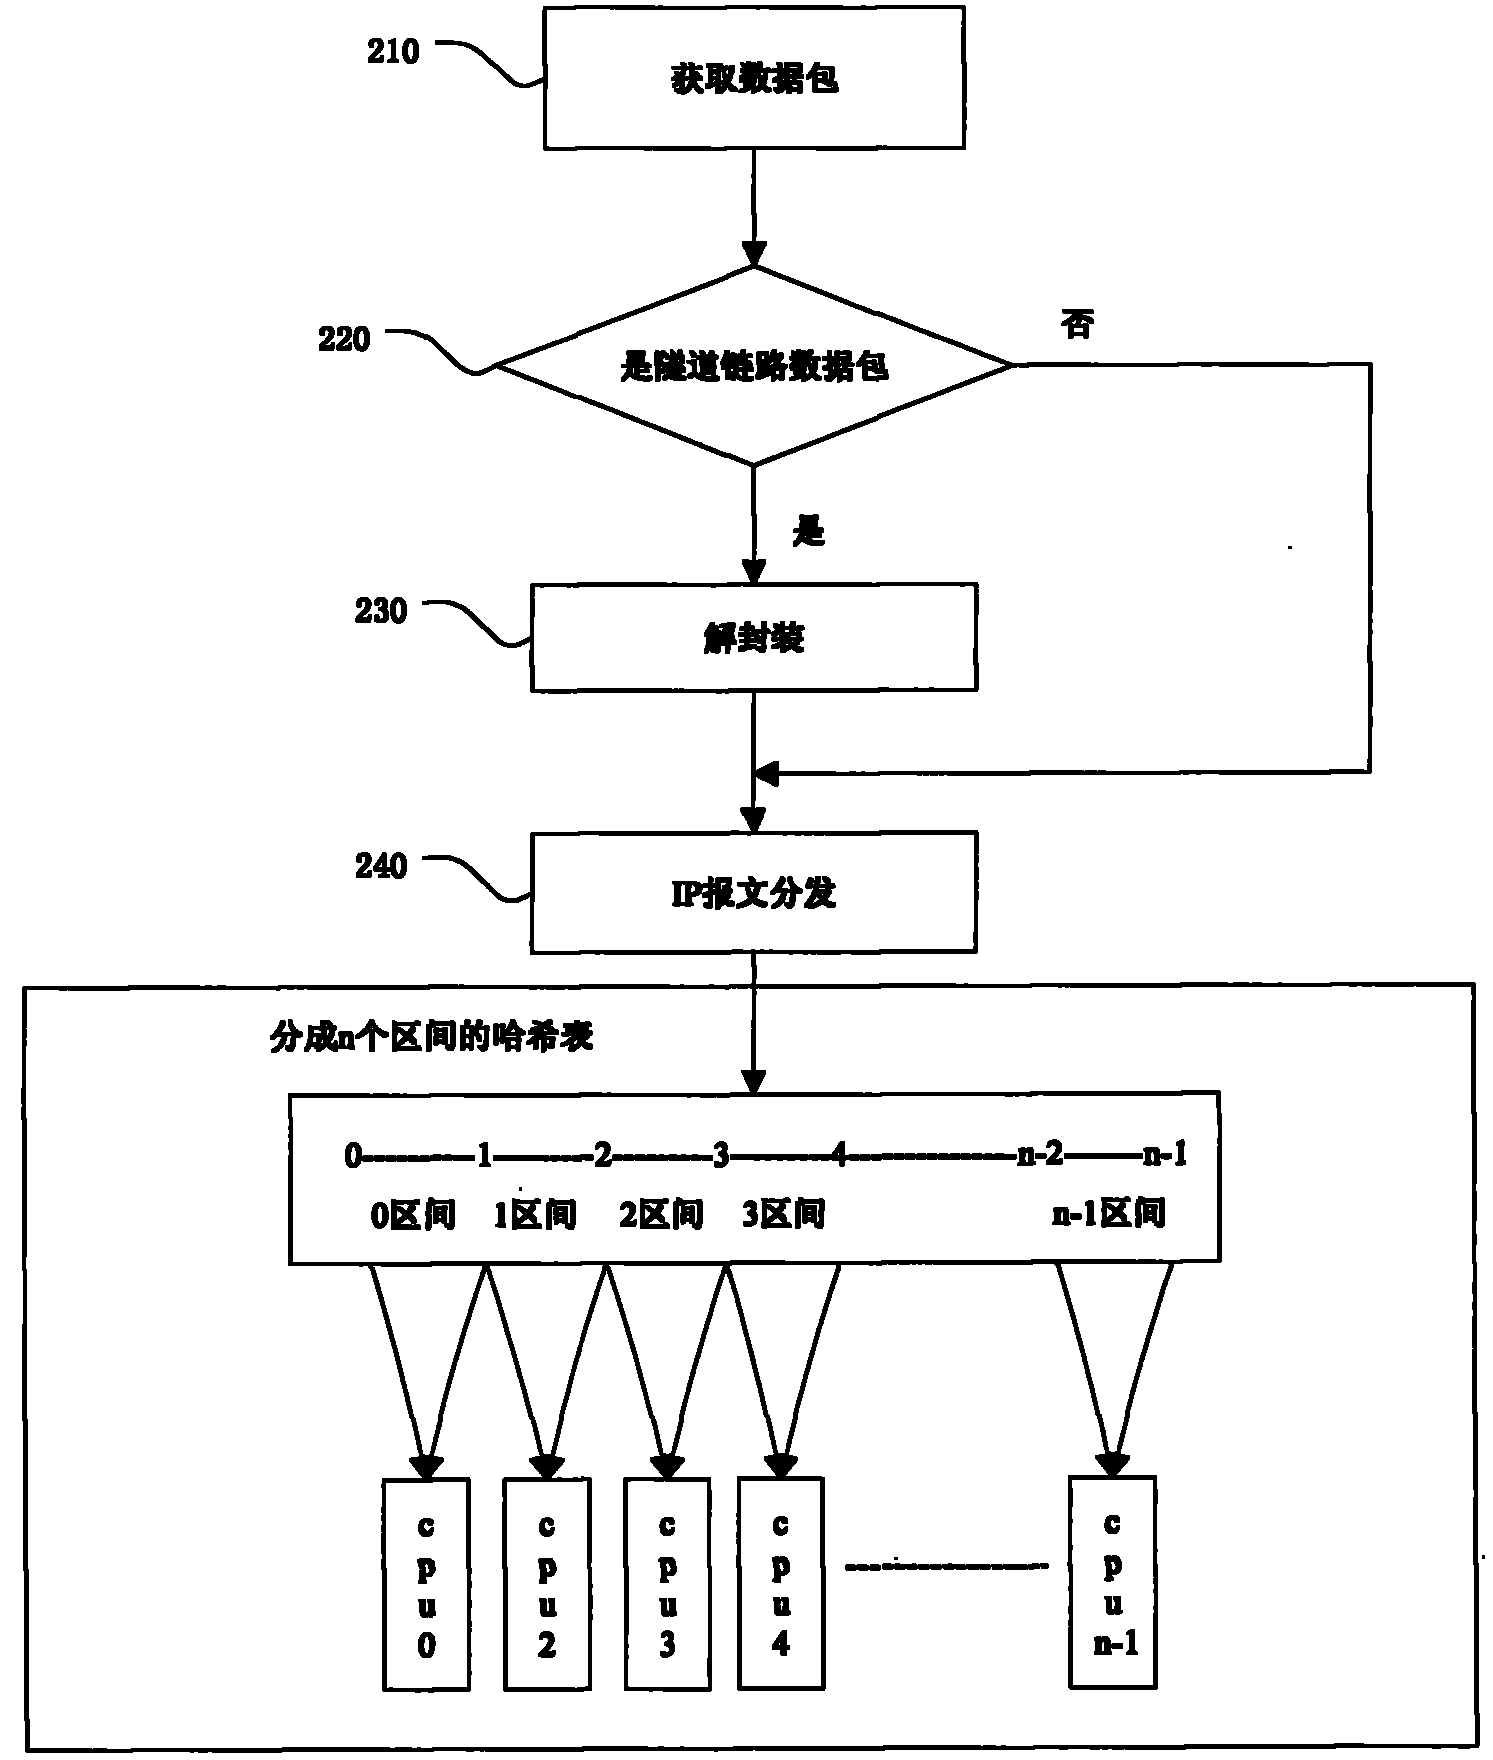 Message retransmission method and system based on multi-core architecture